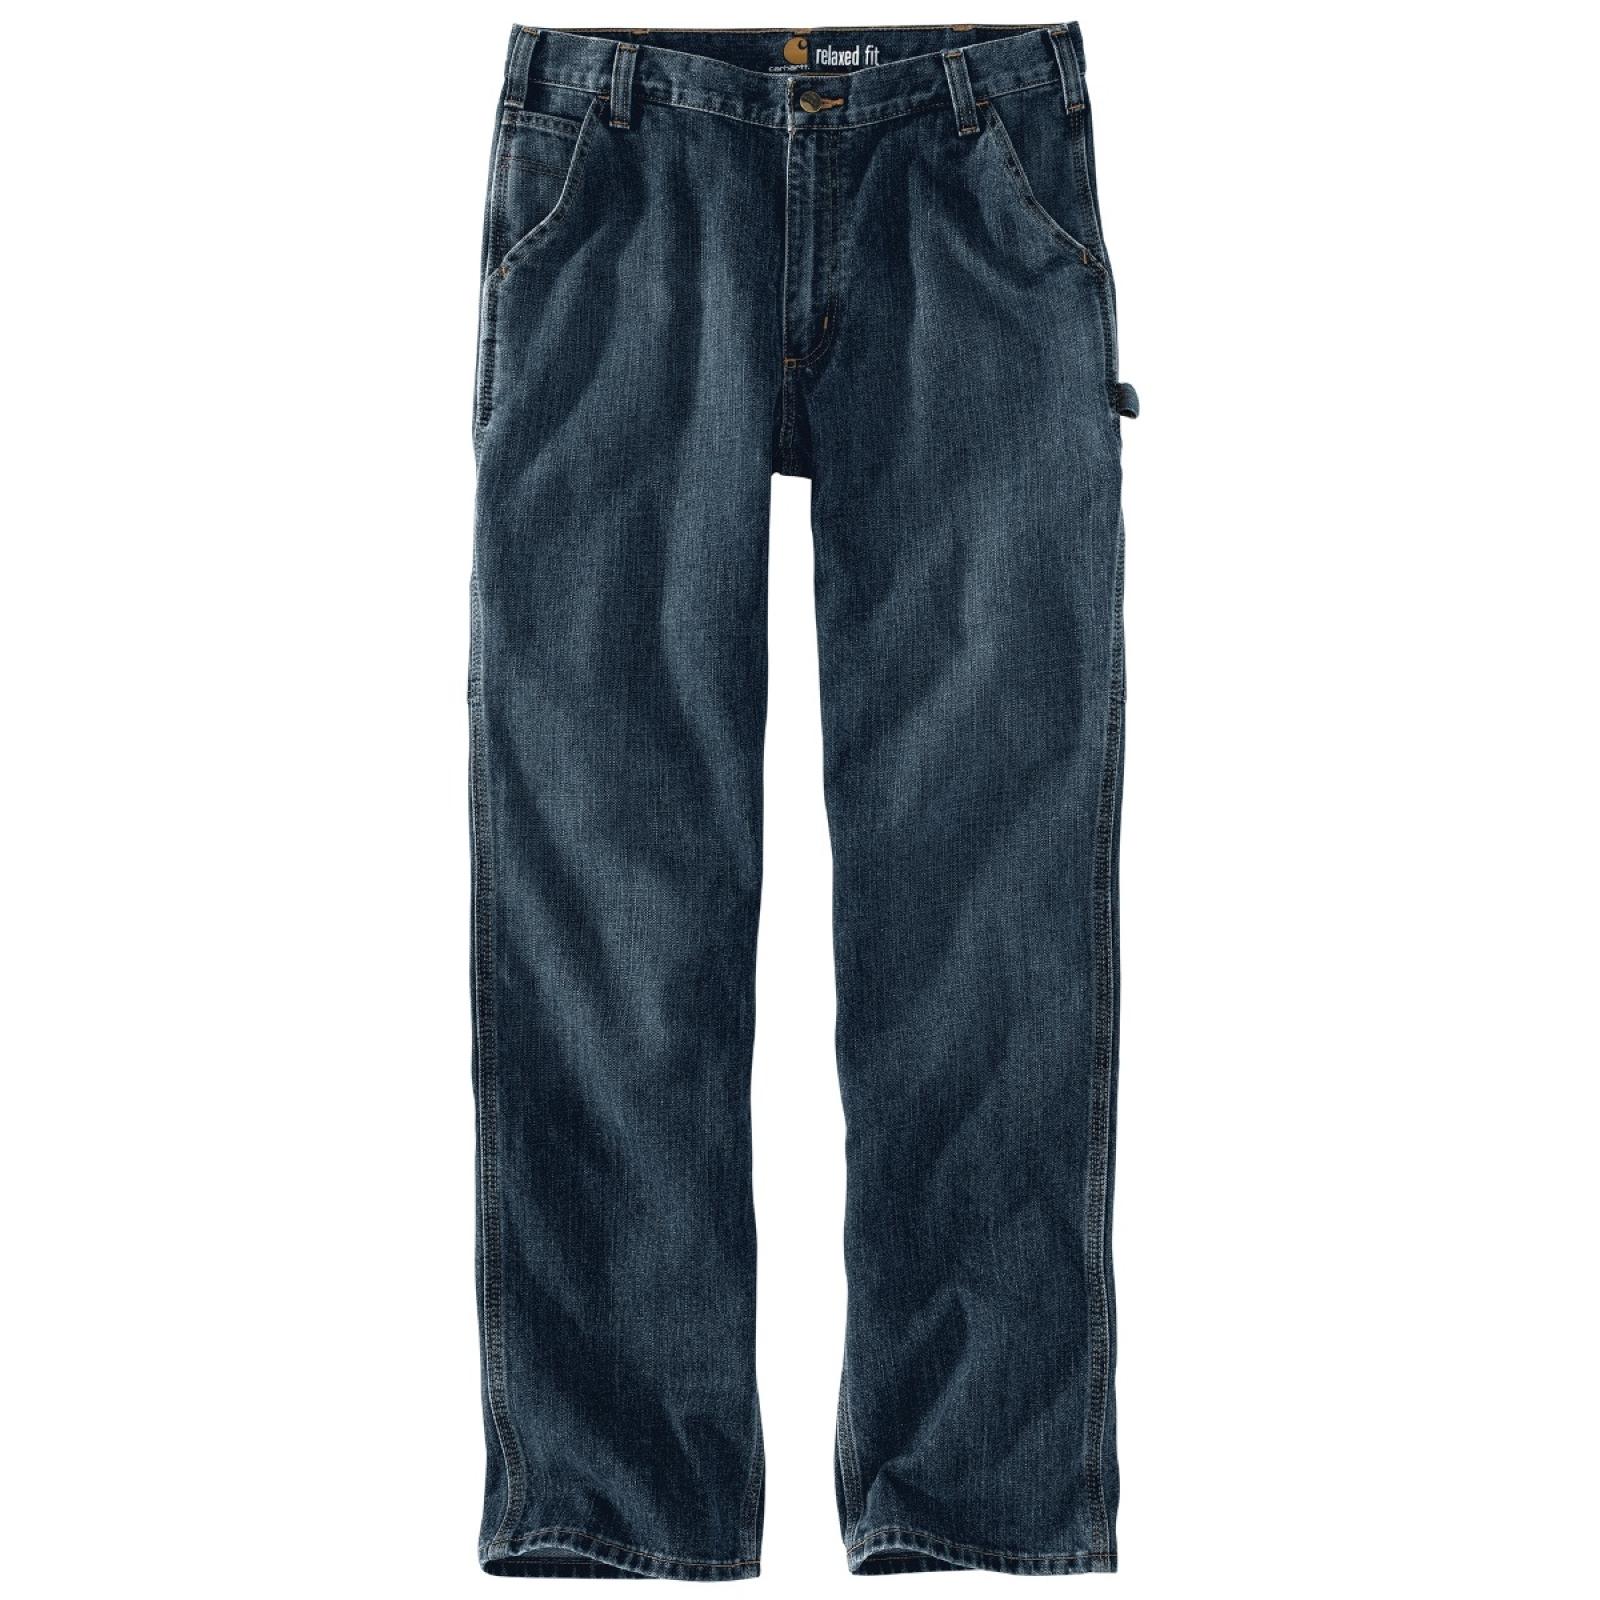 Carhartt Mens Relaxed Fit Holter Dungaree Jean